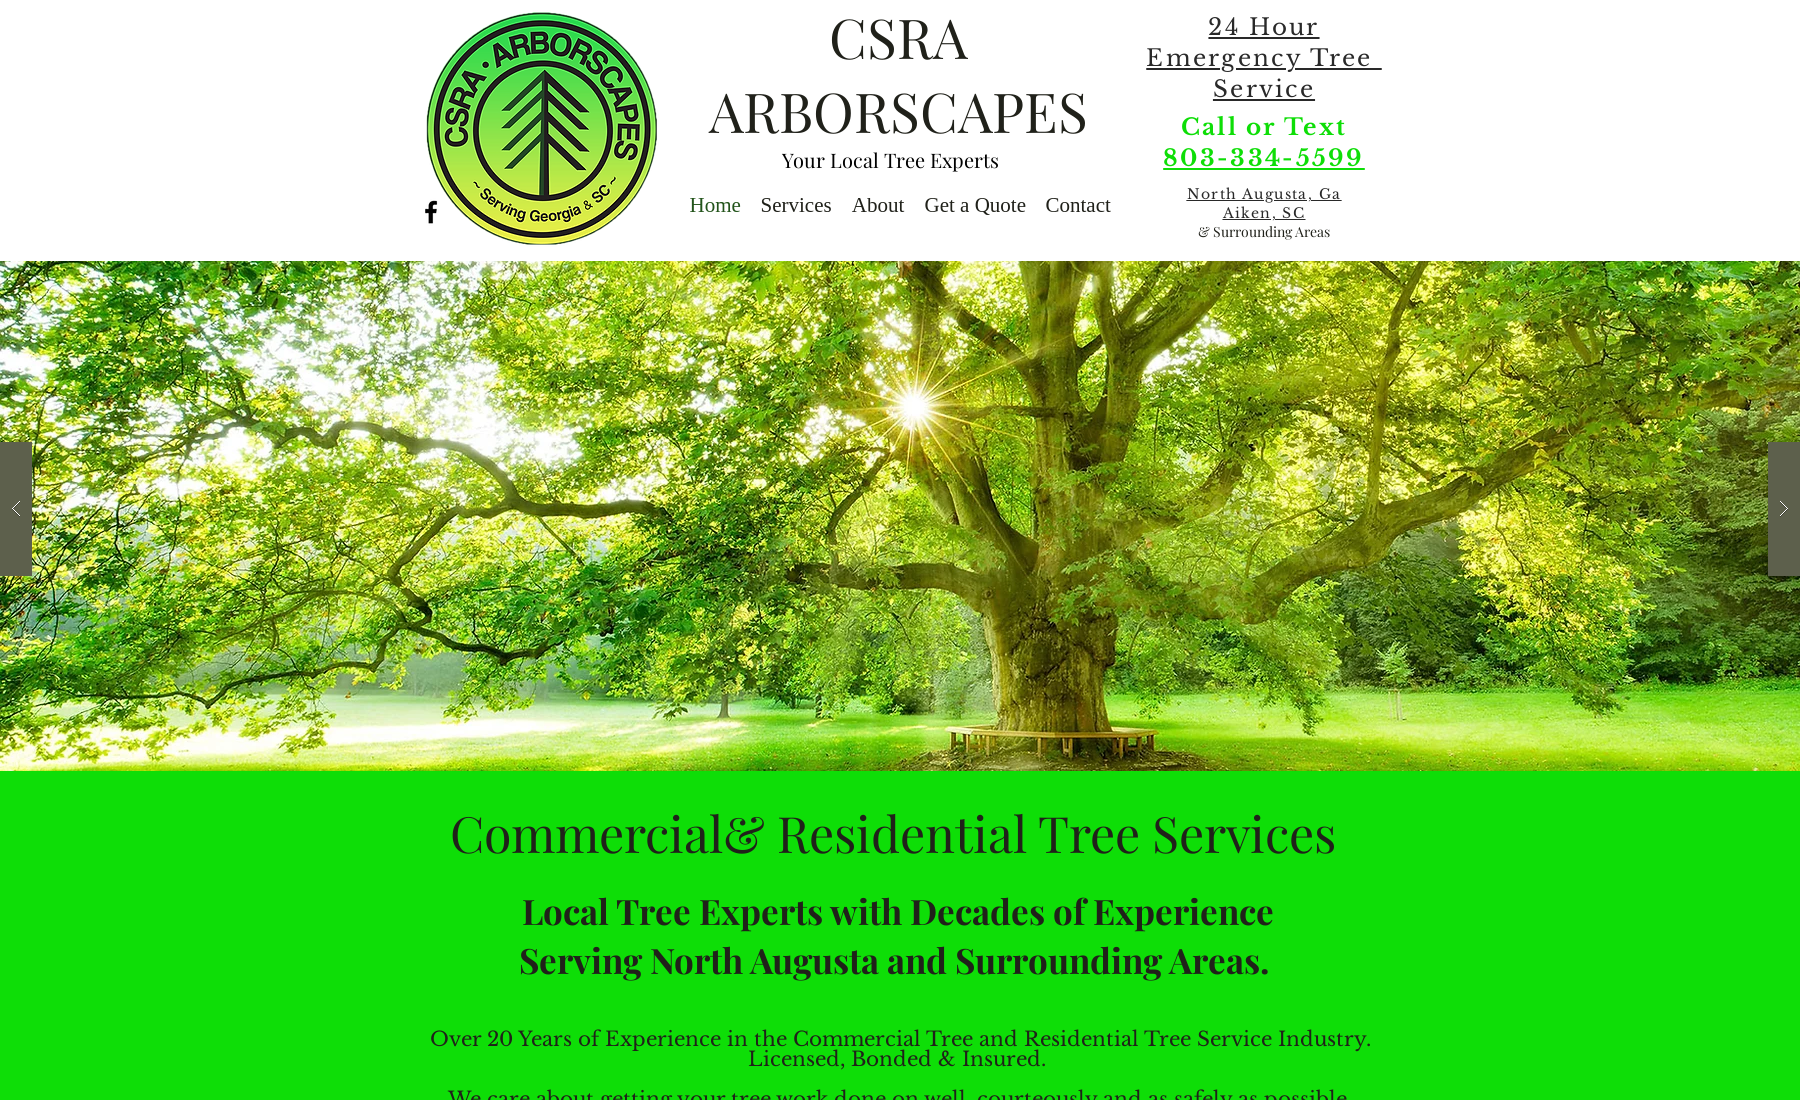 CSRA Arborscapes: A beautiful site built for a Tree Company located in North Augusta. Clean, simple and to the point.